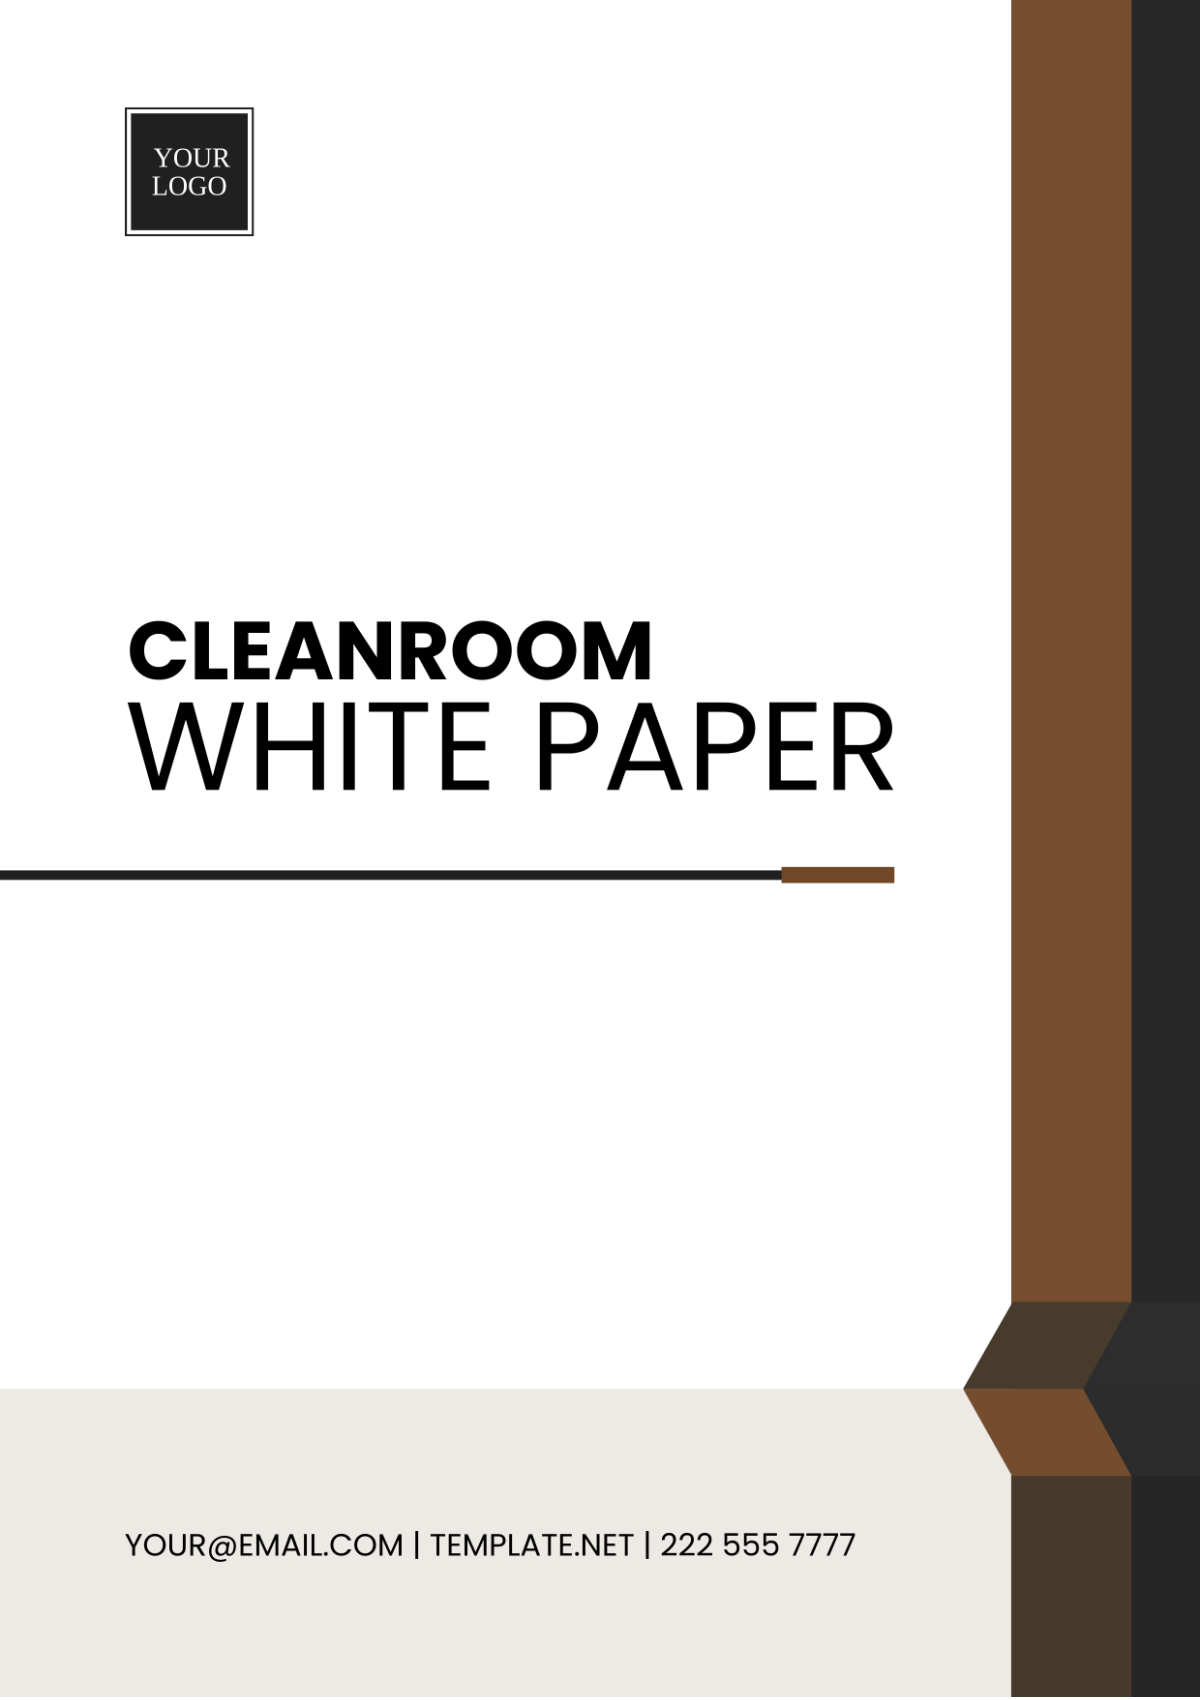 Cleanroom White Paper Template